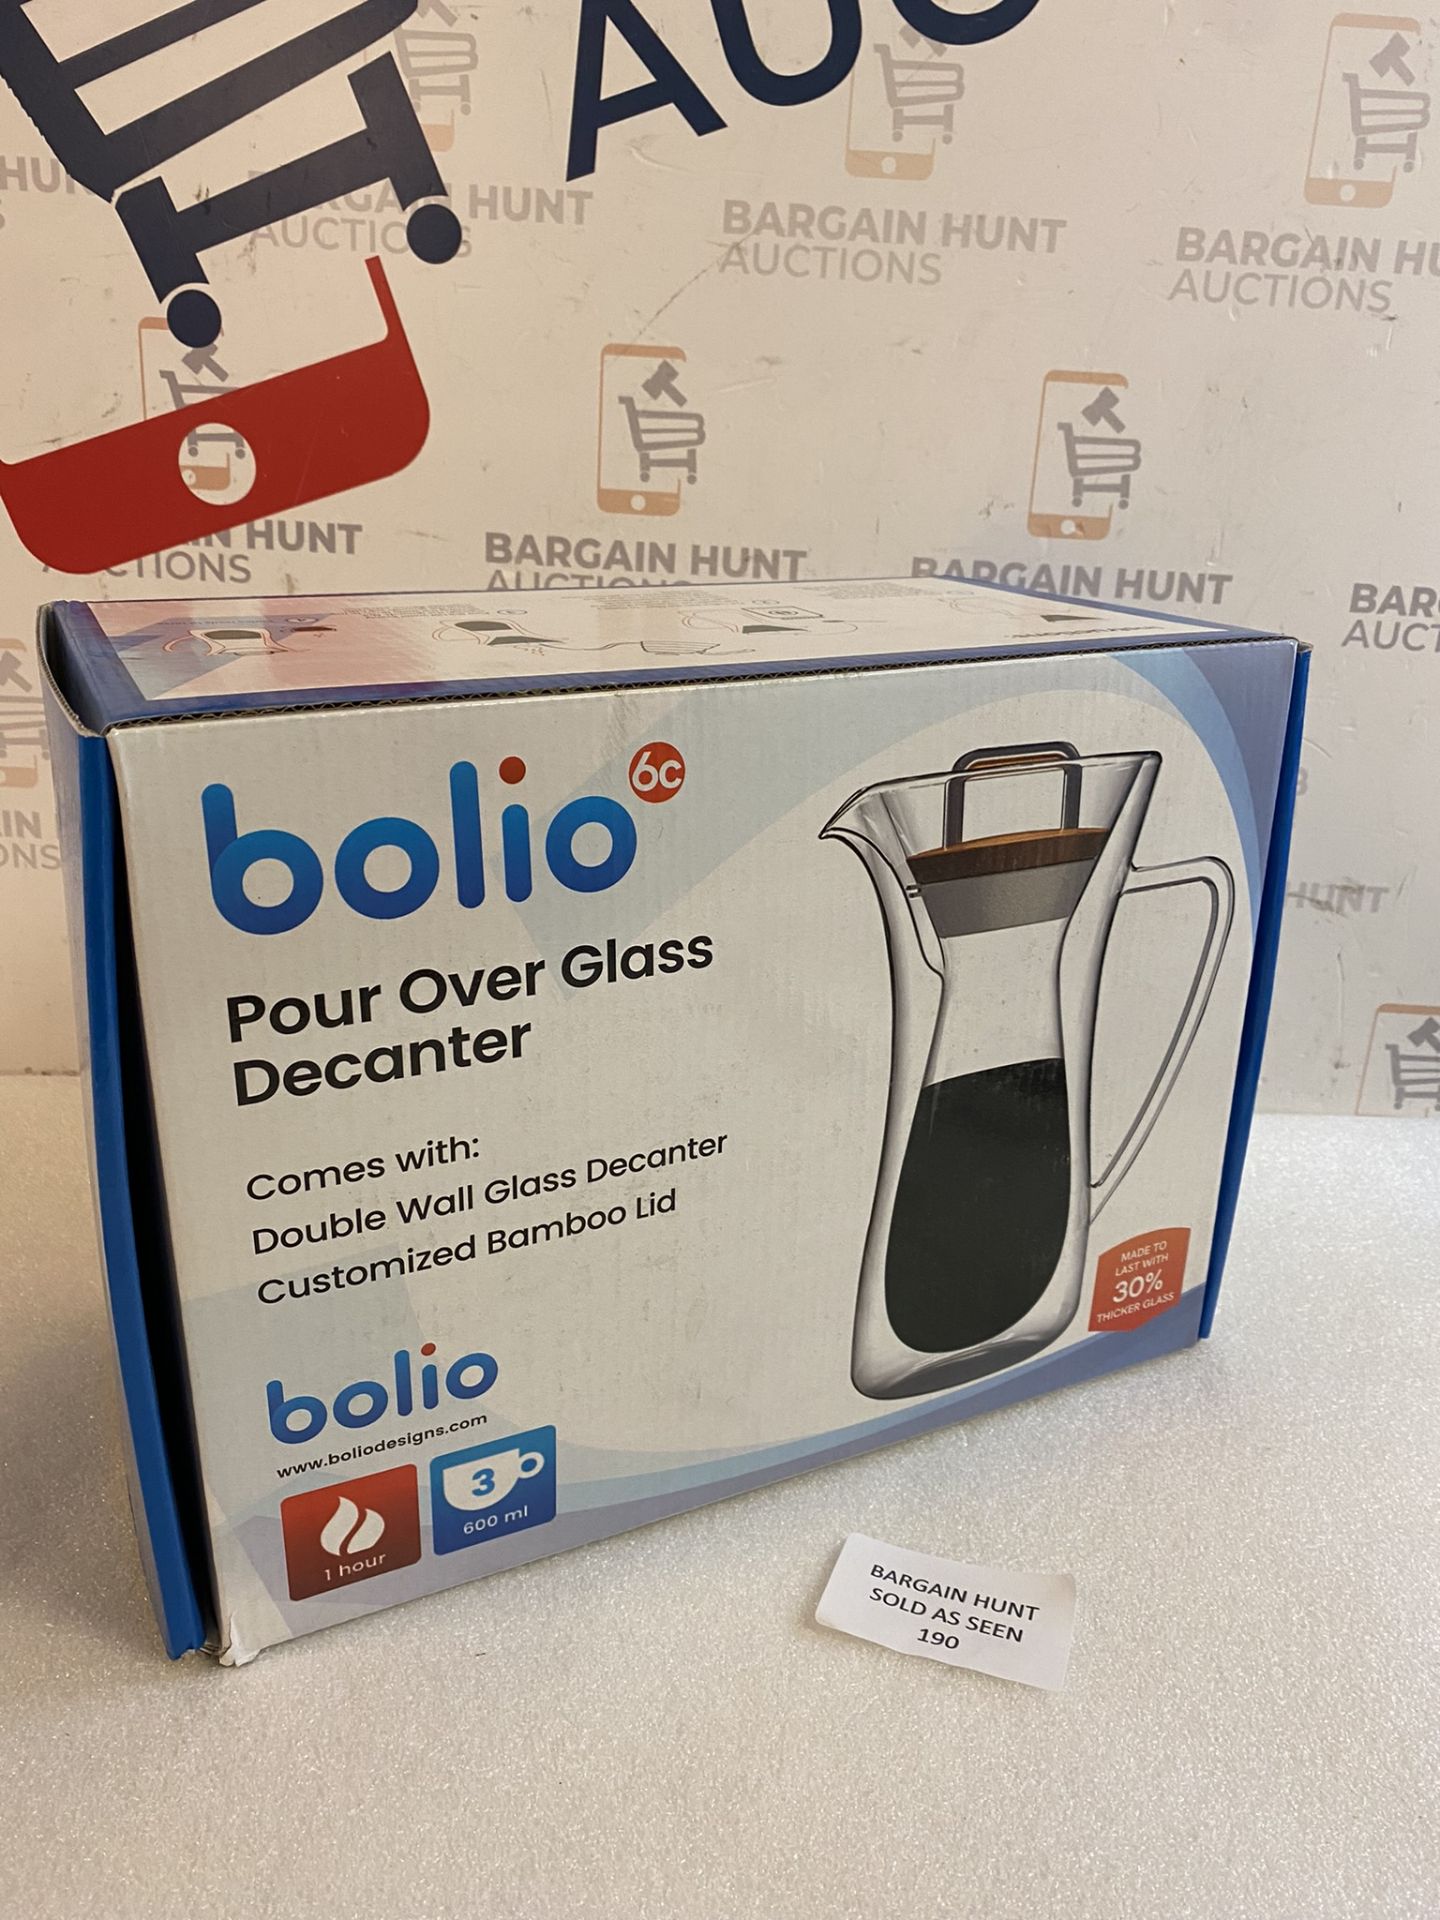 Bolio Pour Over Double Wall Glass Decanter RRP £39.99 - Image 2 of 2